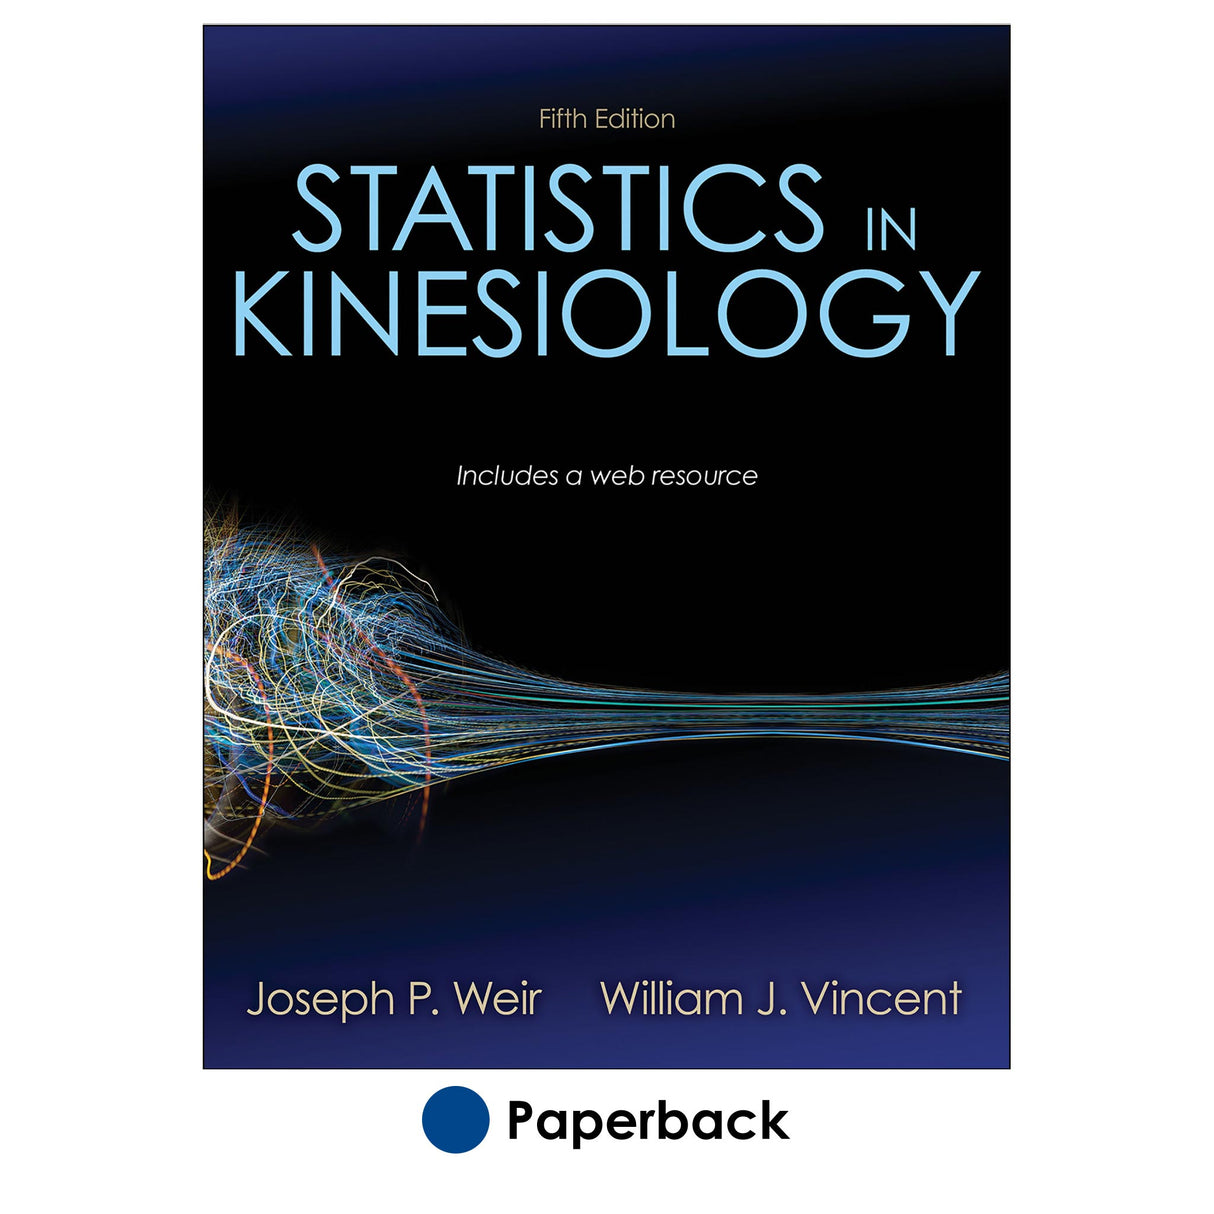 Statistics in Kinesiology 5th Edition With Web Resource